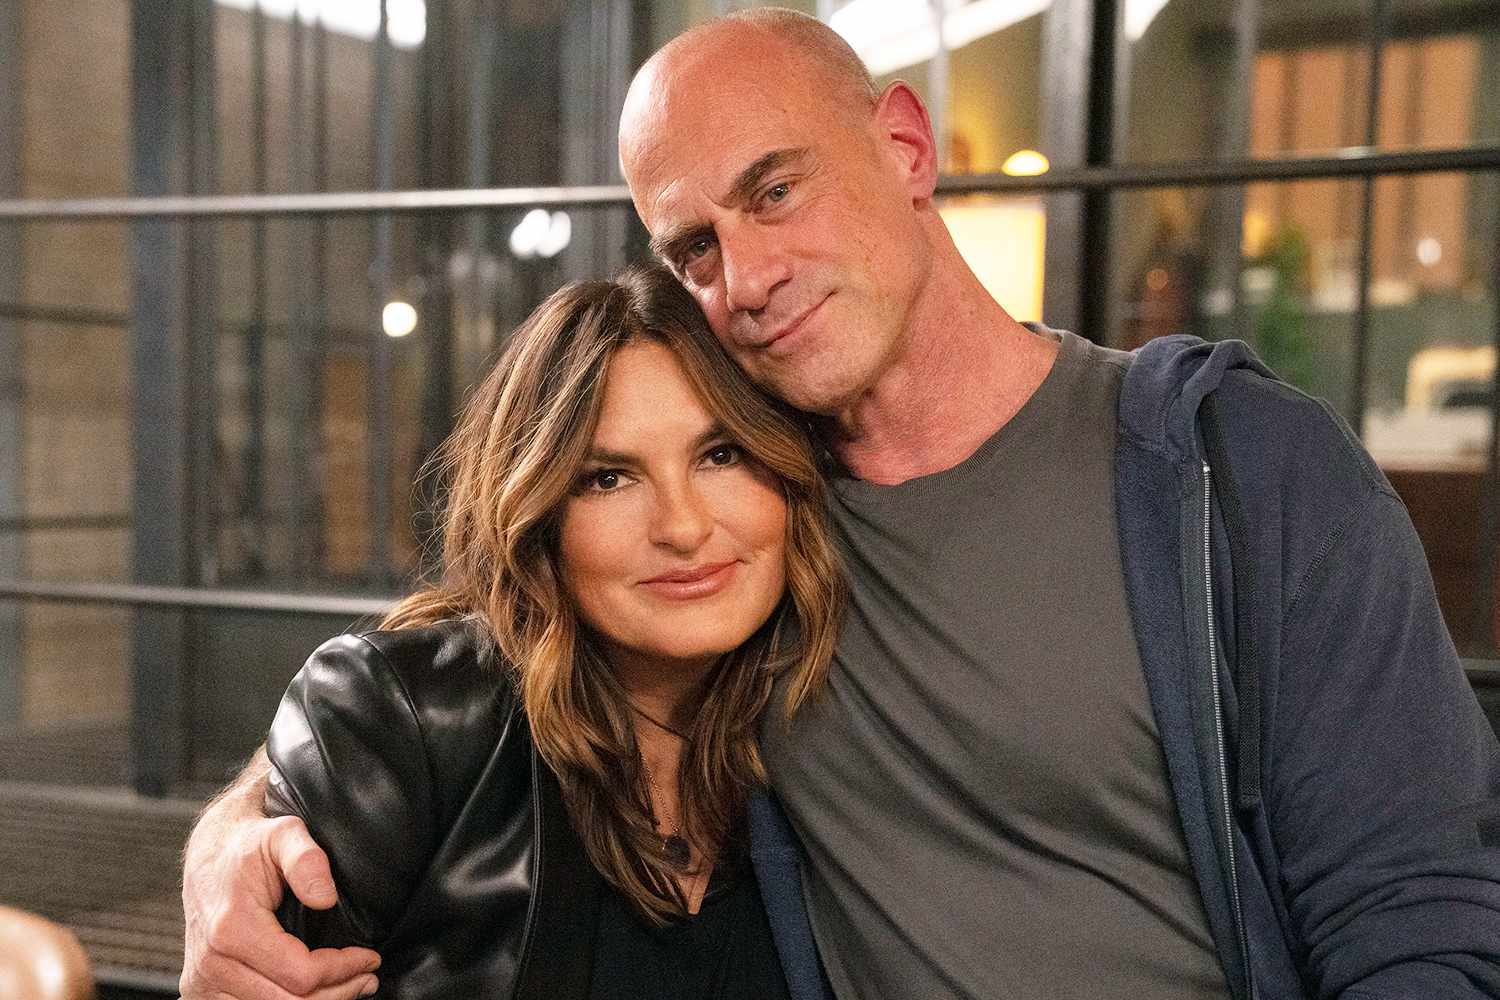 Mariska Hargitay Thought She 'Should' Kiss Christopher Meloni in That Intense 'SVU' Scene: 'Our Chemistry is Undeniable'